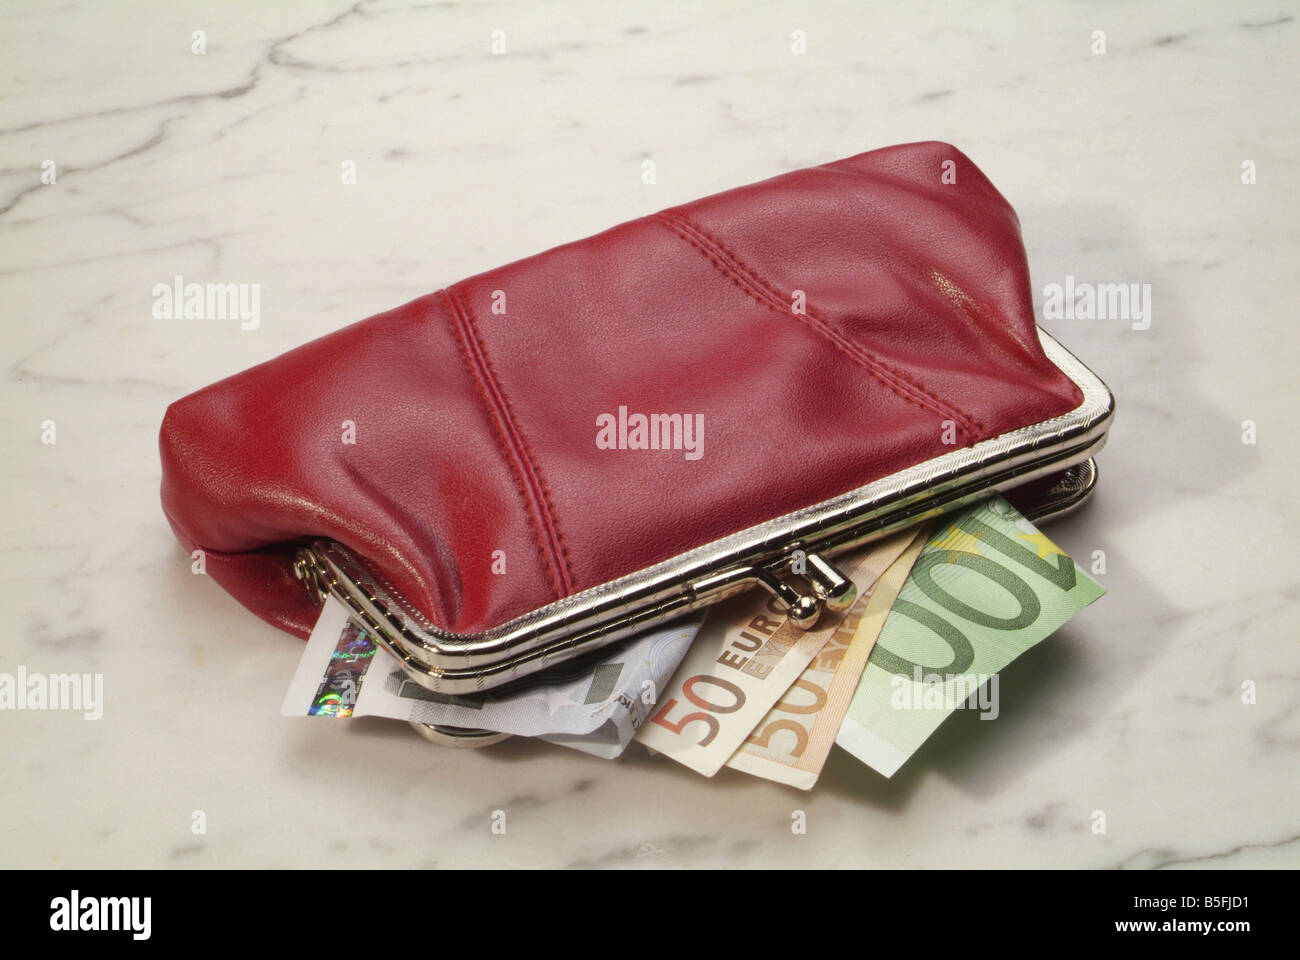 A red purse with contents Stock Photo